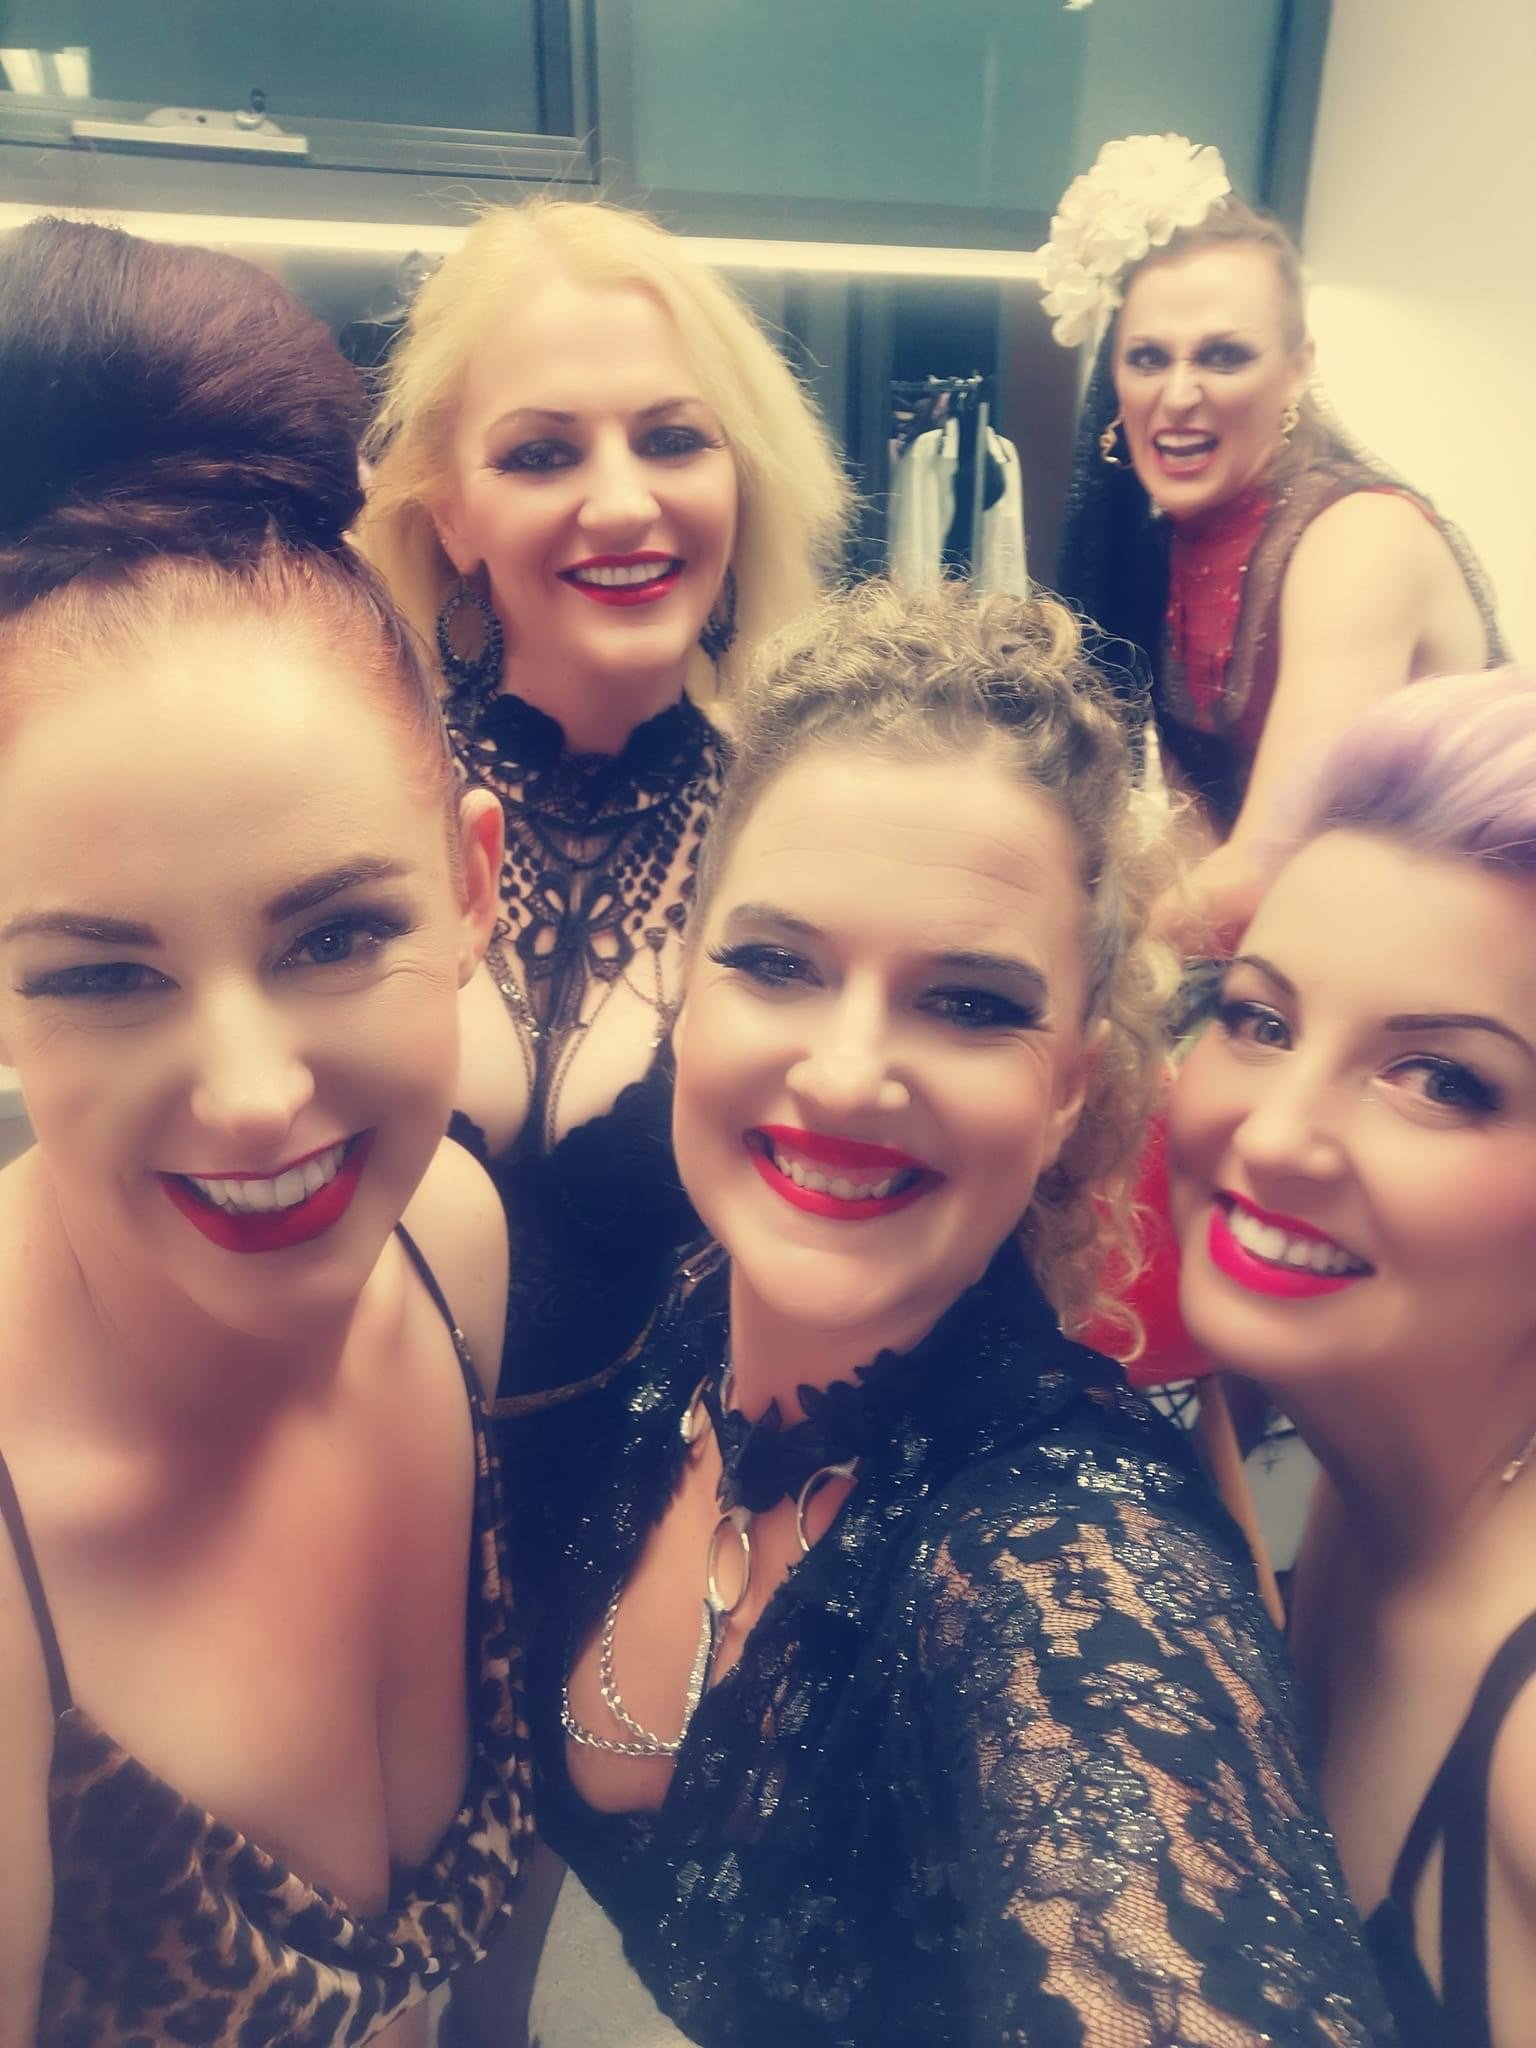 Backstage at Burlesque Showcase Moonah 